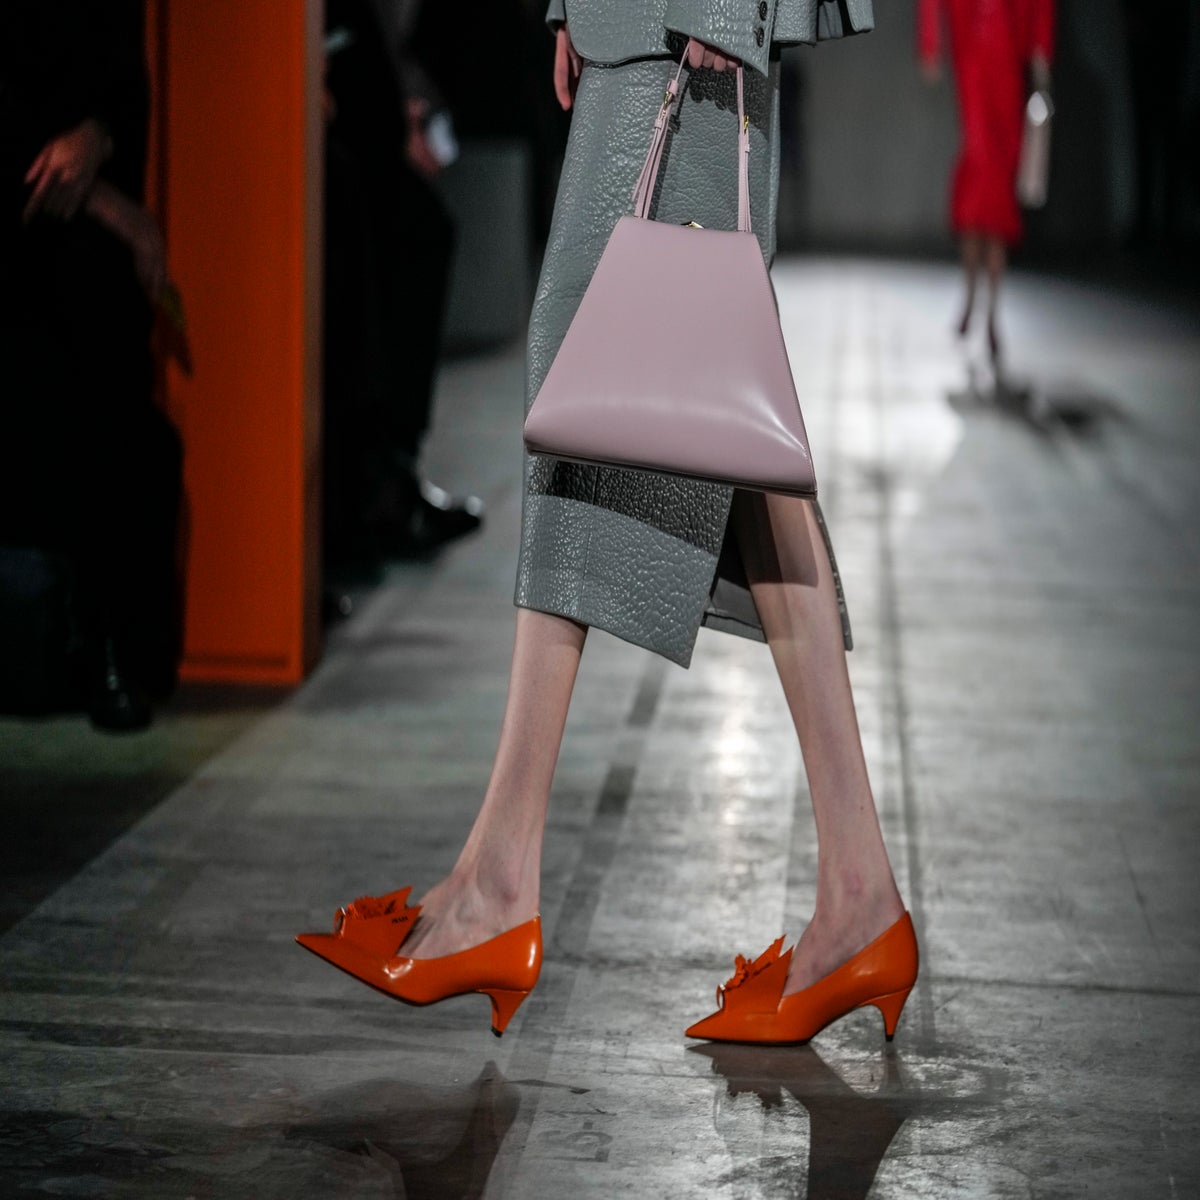 Prada, Max Mara promote modesty and utility on Milan runways | The  Independent